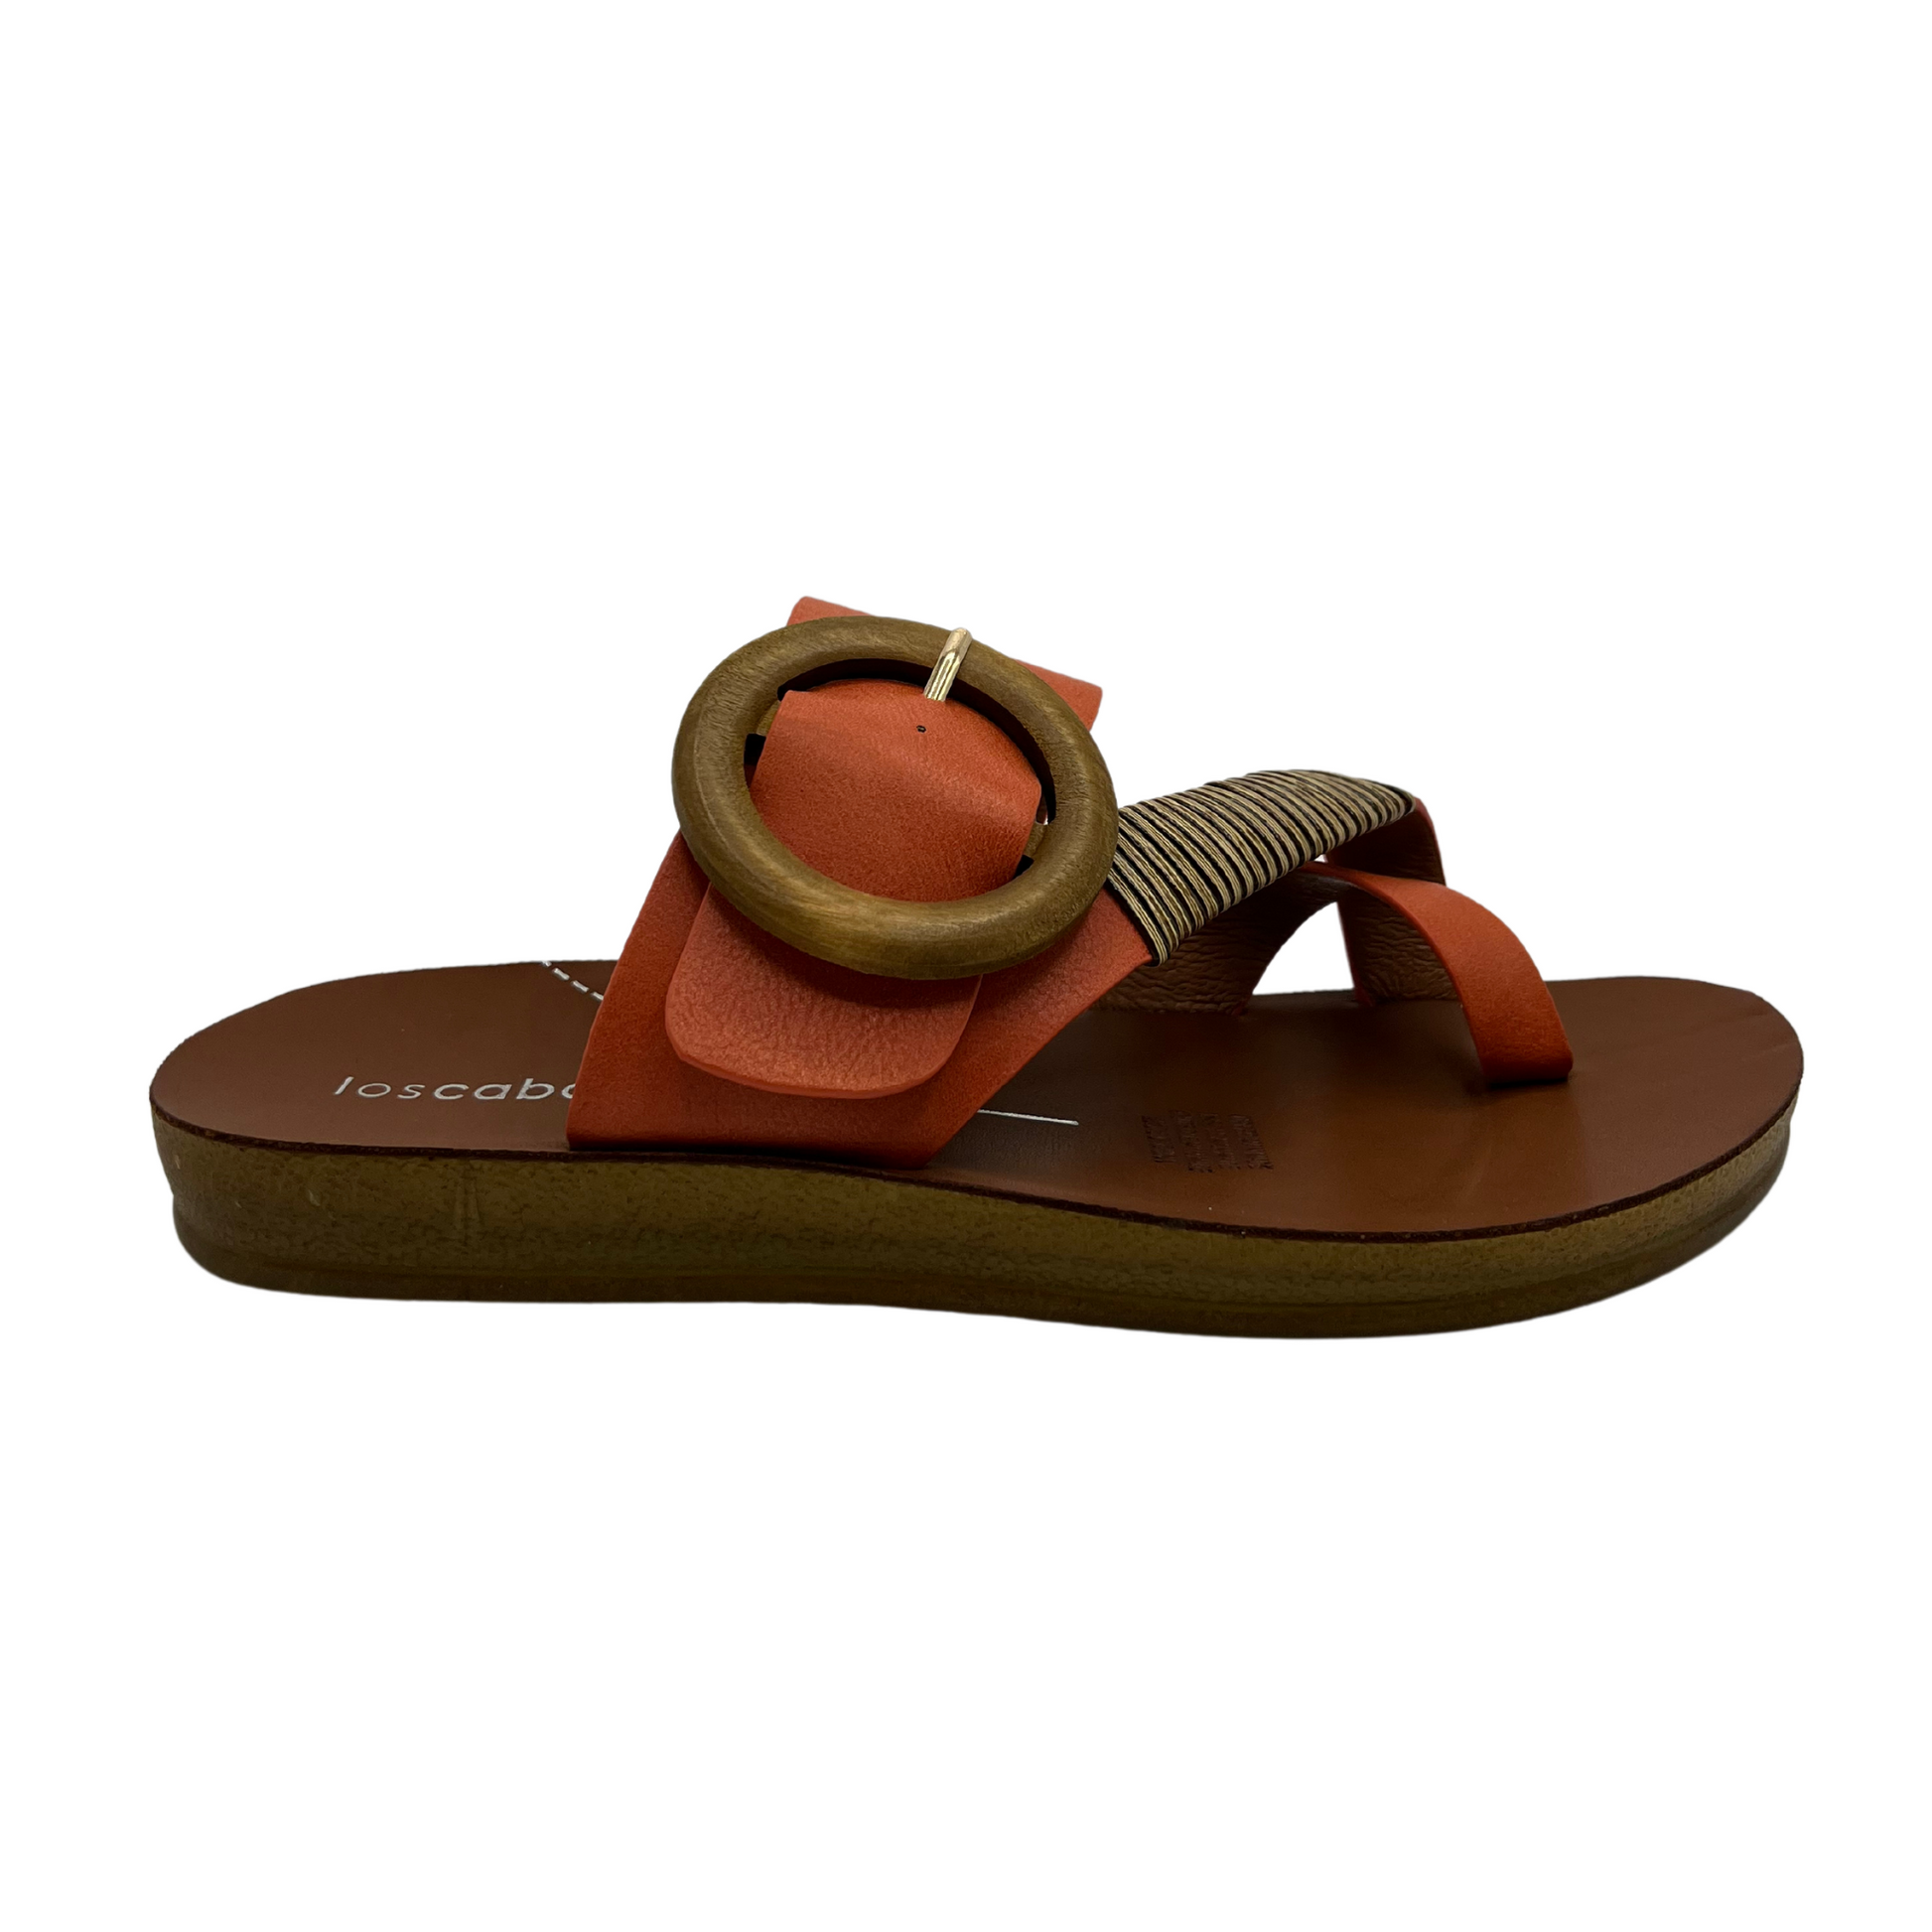 Right facing view of orange strapped slip on sandal. Featuring a wooden buckle and bamboo wrap on the toe strap.